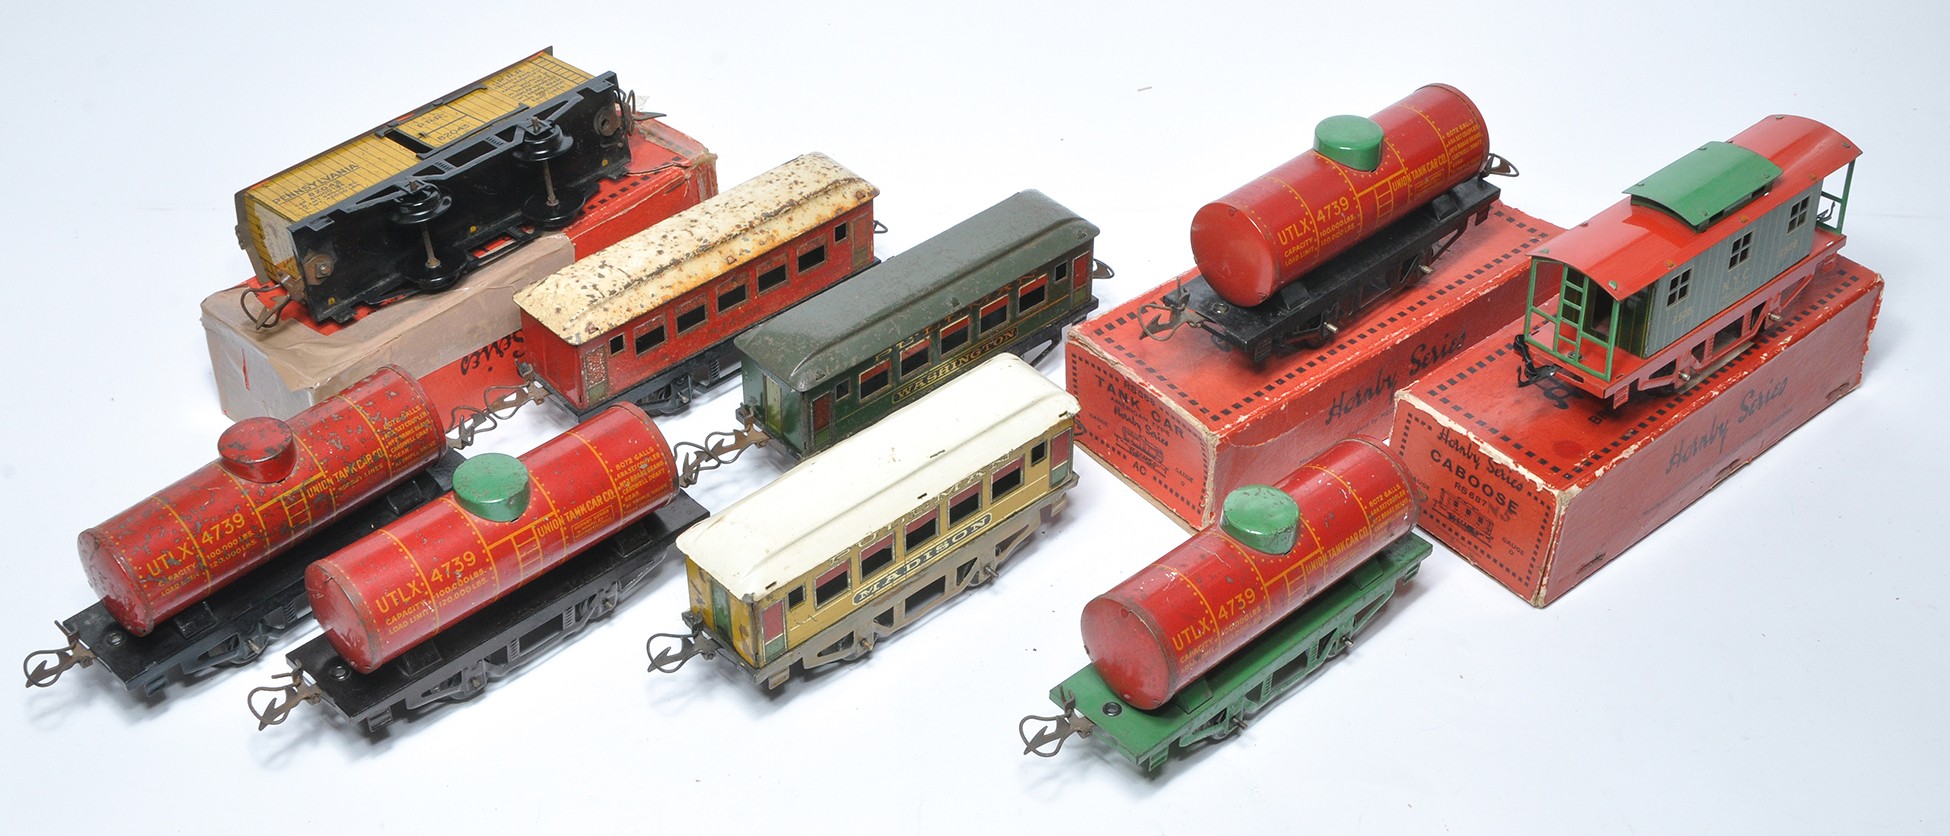 Hornby O Gauge Model Railway comprising a quantity of American Railway issues as shown. Fair to